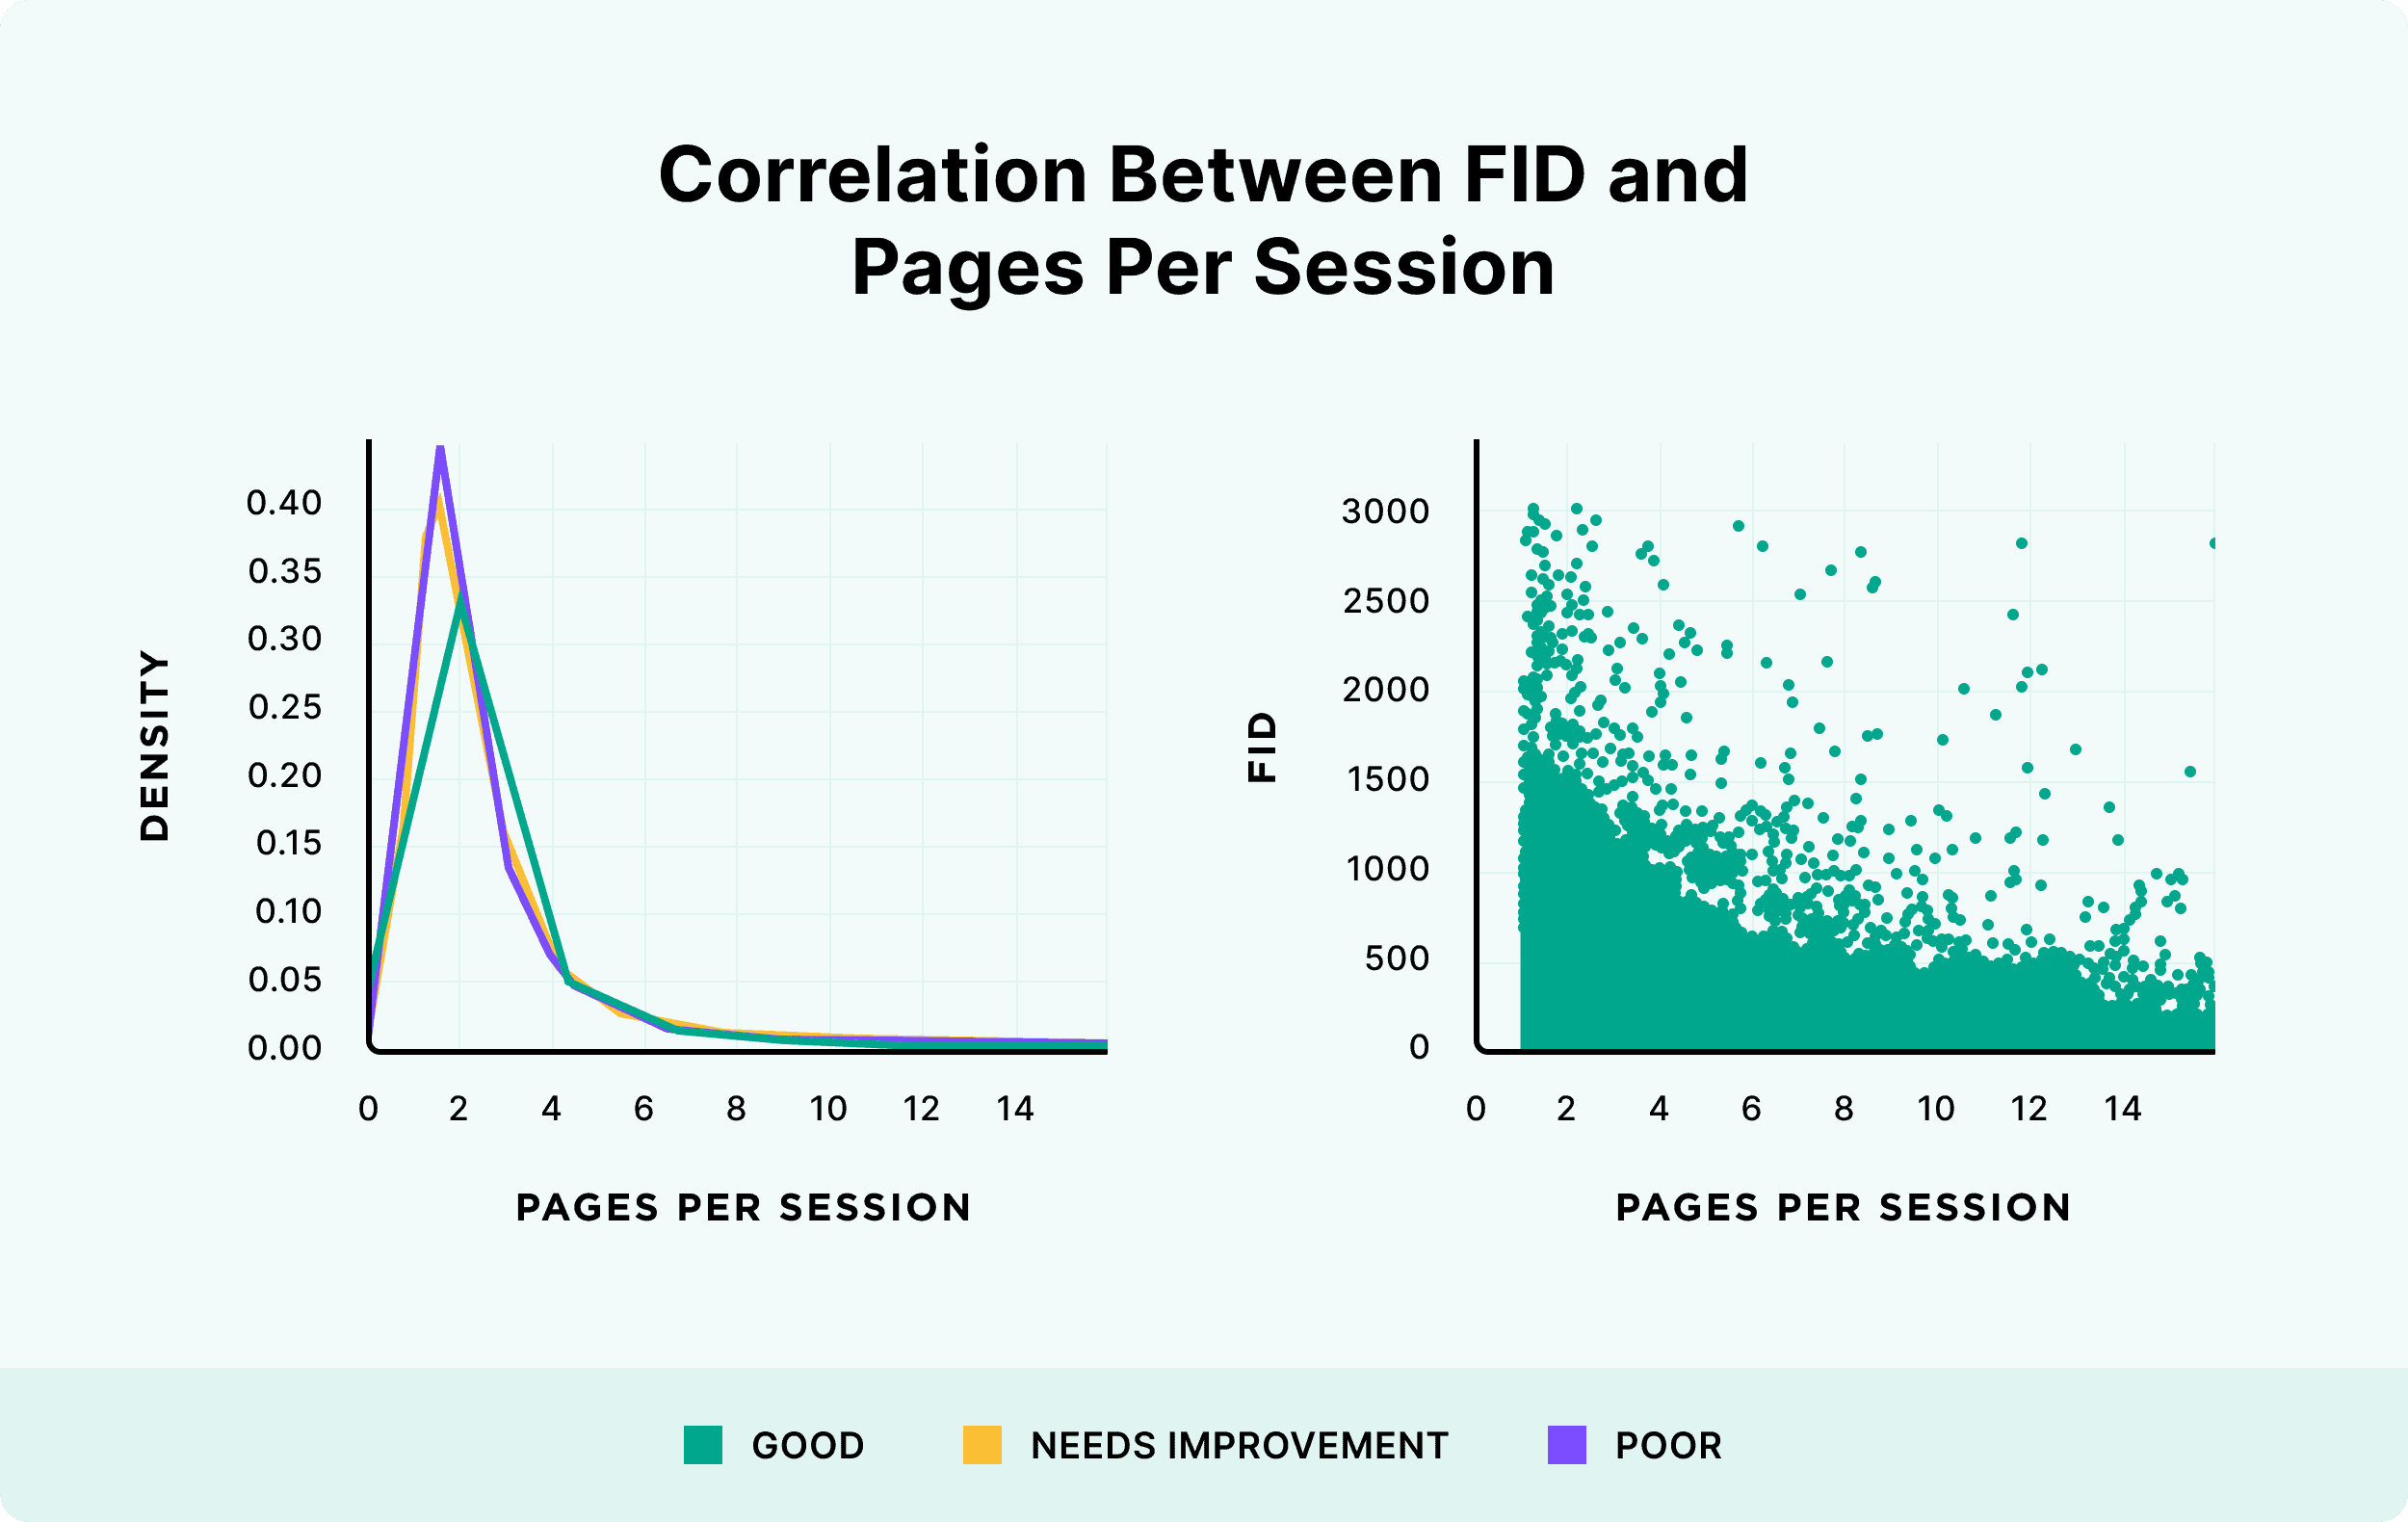 Correlation between FID and pages per session